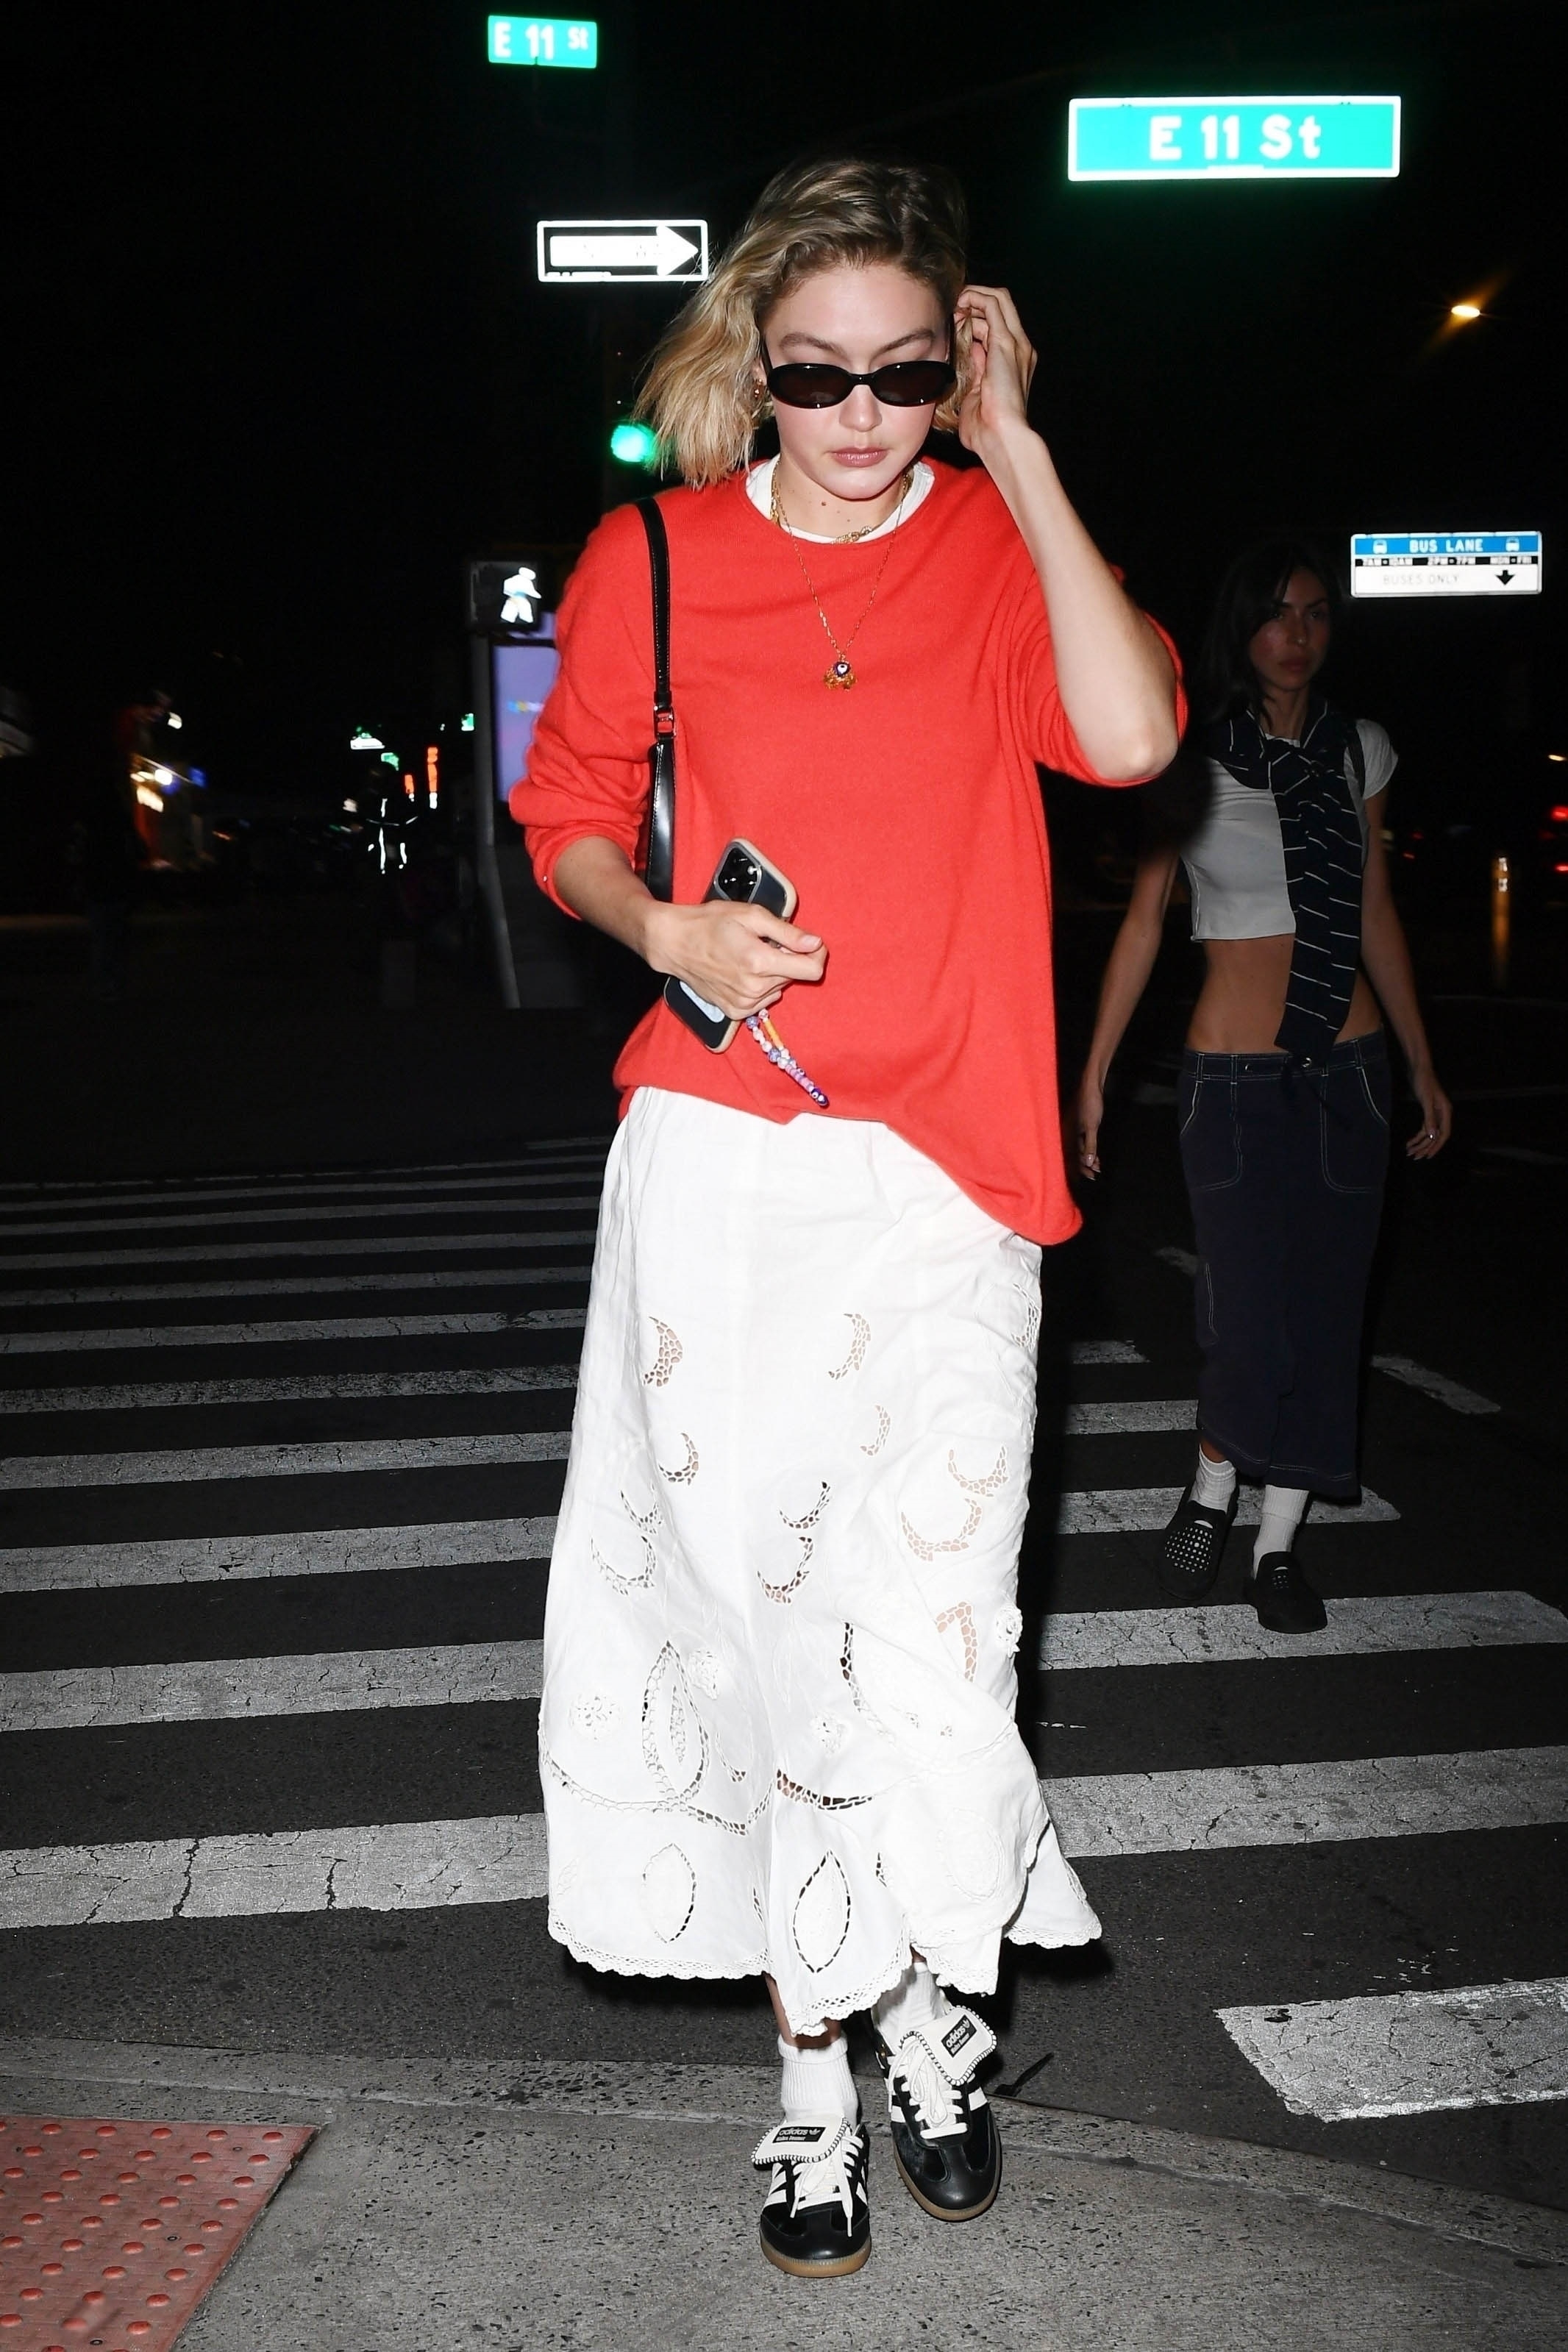 Gigi Hadid walking in New York City wearing a red T-shirt, sunglasses, sneakers, and a white eyelet skirt.